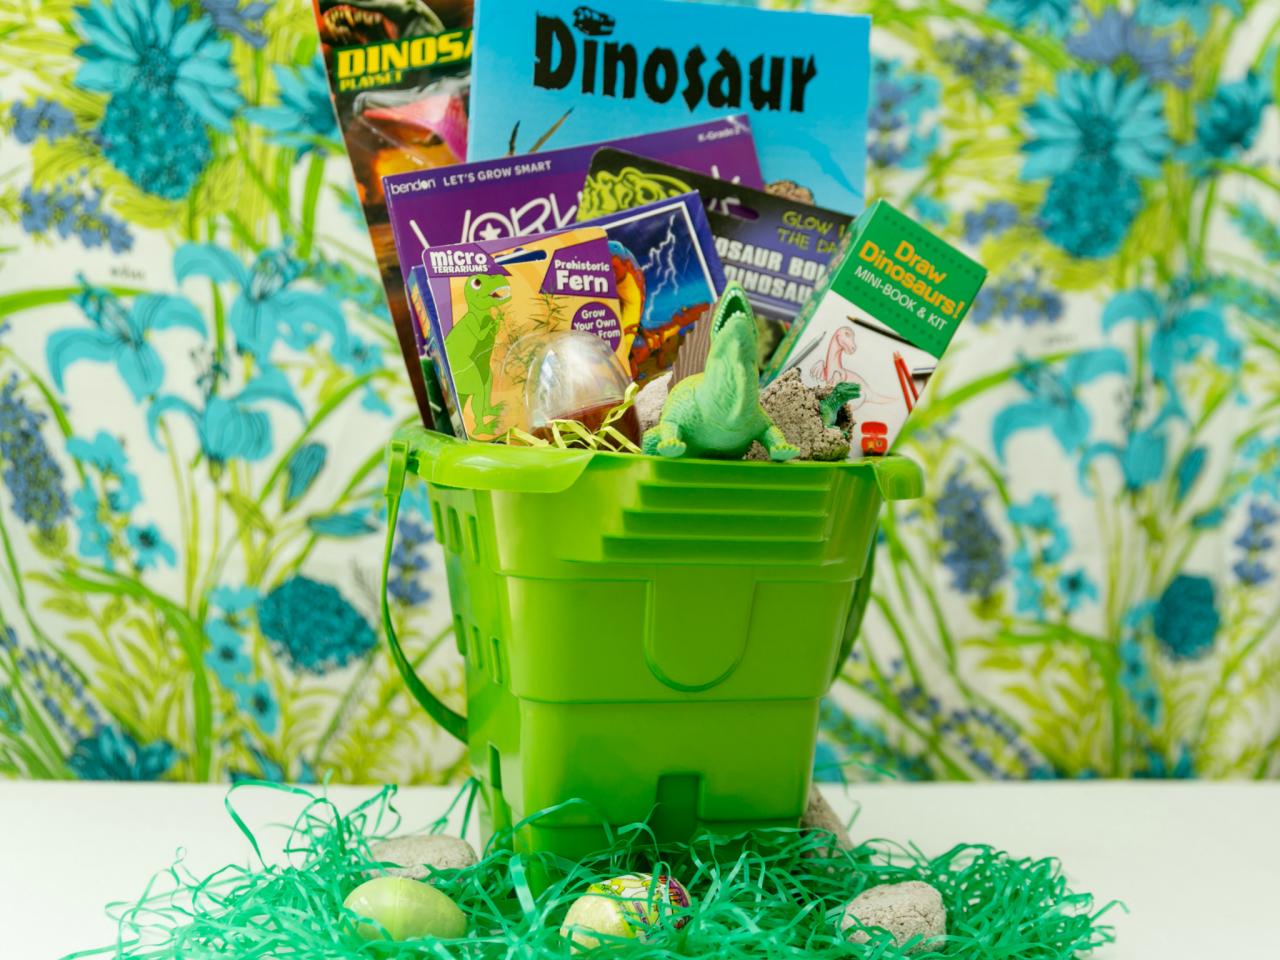 Grow Your Own Easter Basket Grass